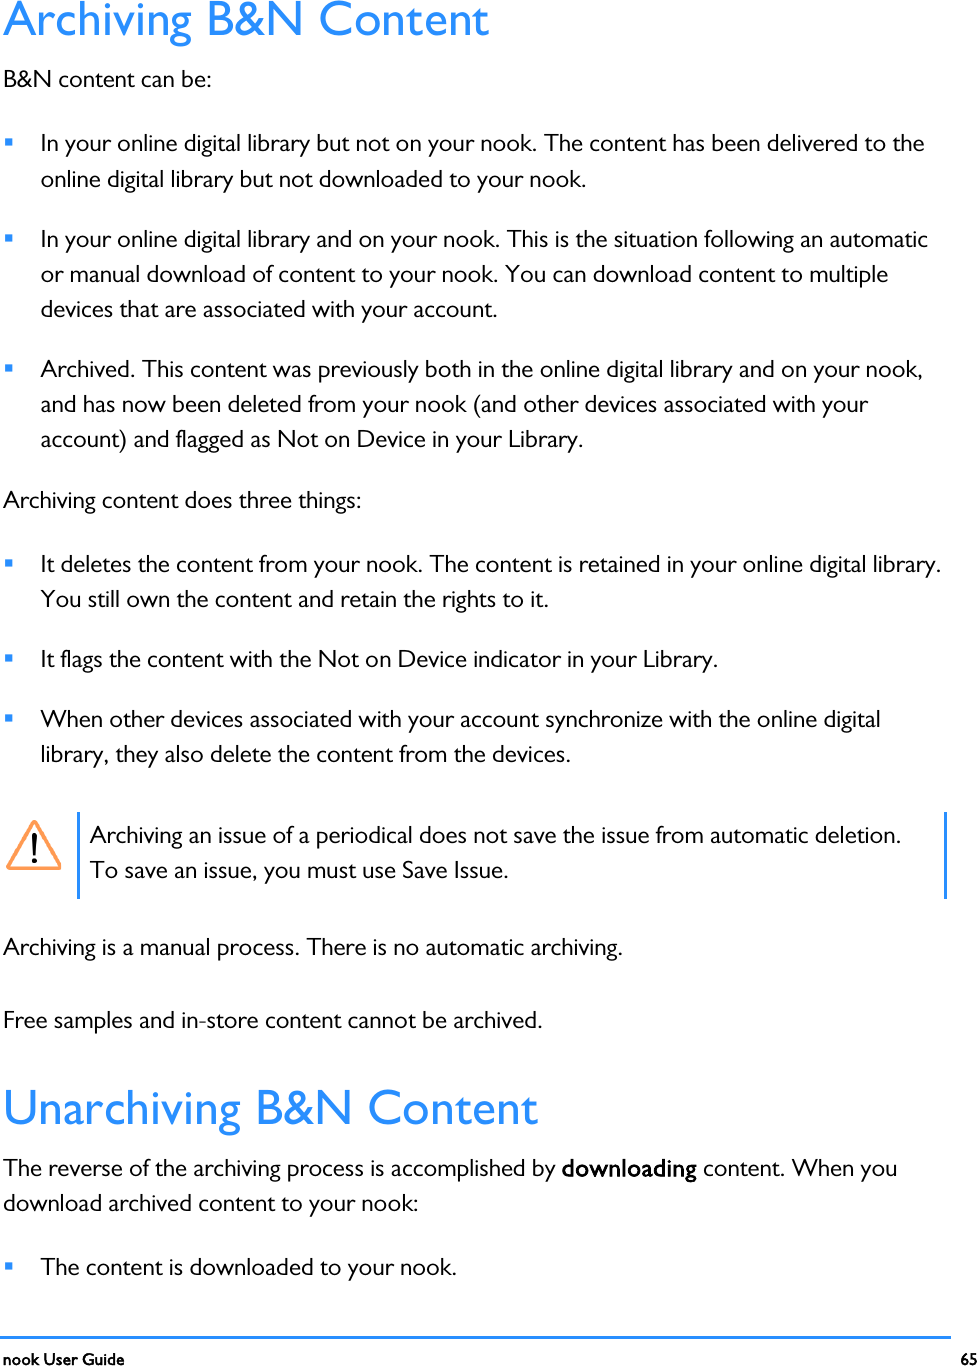  nook User Guide    65        Archiving B&amp;N Content B&amp;N content can be:  In your online digital library but not on your nook. The content has been delivered to the online digital library but not downloaded to your nook.  In your online digital library and on your nook. This is the situation following an automatic or manual download of content to your nook. You can download content to multiple devices that are associated with your account.  Archived. This content was previously both in the online digital library and on your nook, and has now been deleted from your nook (and other devices associated with your account) and flagged as Not on Device in your Library. Archiving content does three things:  It deletes the content from your nook. The content is retained in your online digital library. You still own the content and retain the rights to it.  It flags the content with the Not on Device indicator in your Library.  When other devices associated with your account synchronize with the online digital library, they also delete the content from the devices.  Archiving an issue of a periodical does not save the issue from automatic deletion. To save an issue, you must use Save Issue. Archiving is a manual process. There is no automatic archiving. Free samples and in-store content cannot be archived. Unarchiving B&amp;N Content The reverse of the archiving process is accomplished by downloading content. When you download archived content to your nook:  The content is downloaded to your nook. 